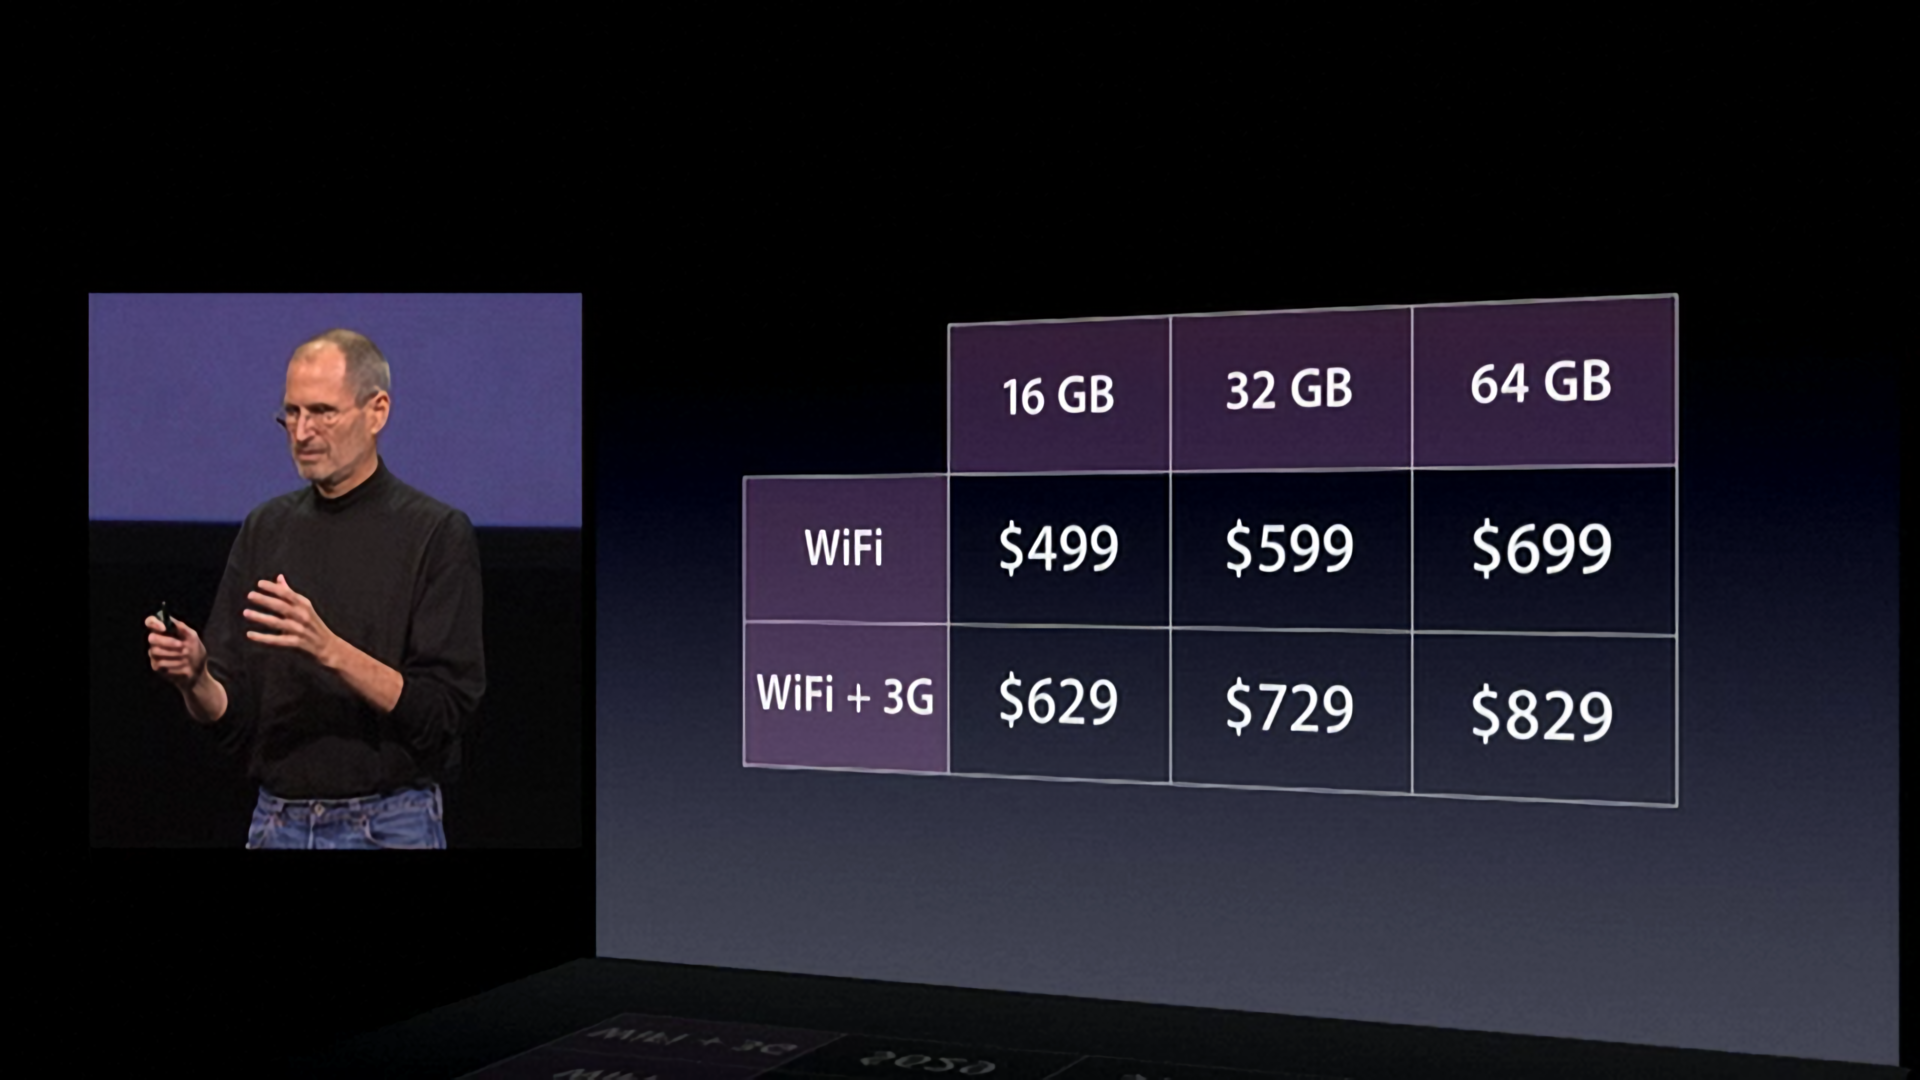 Apple shocked the crowd announcing a $499 starting price for the iPad.